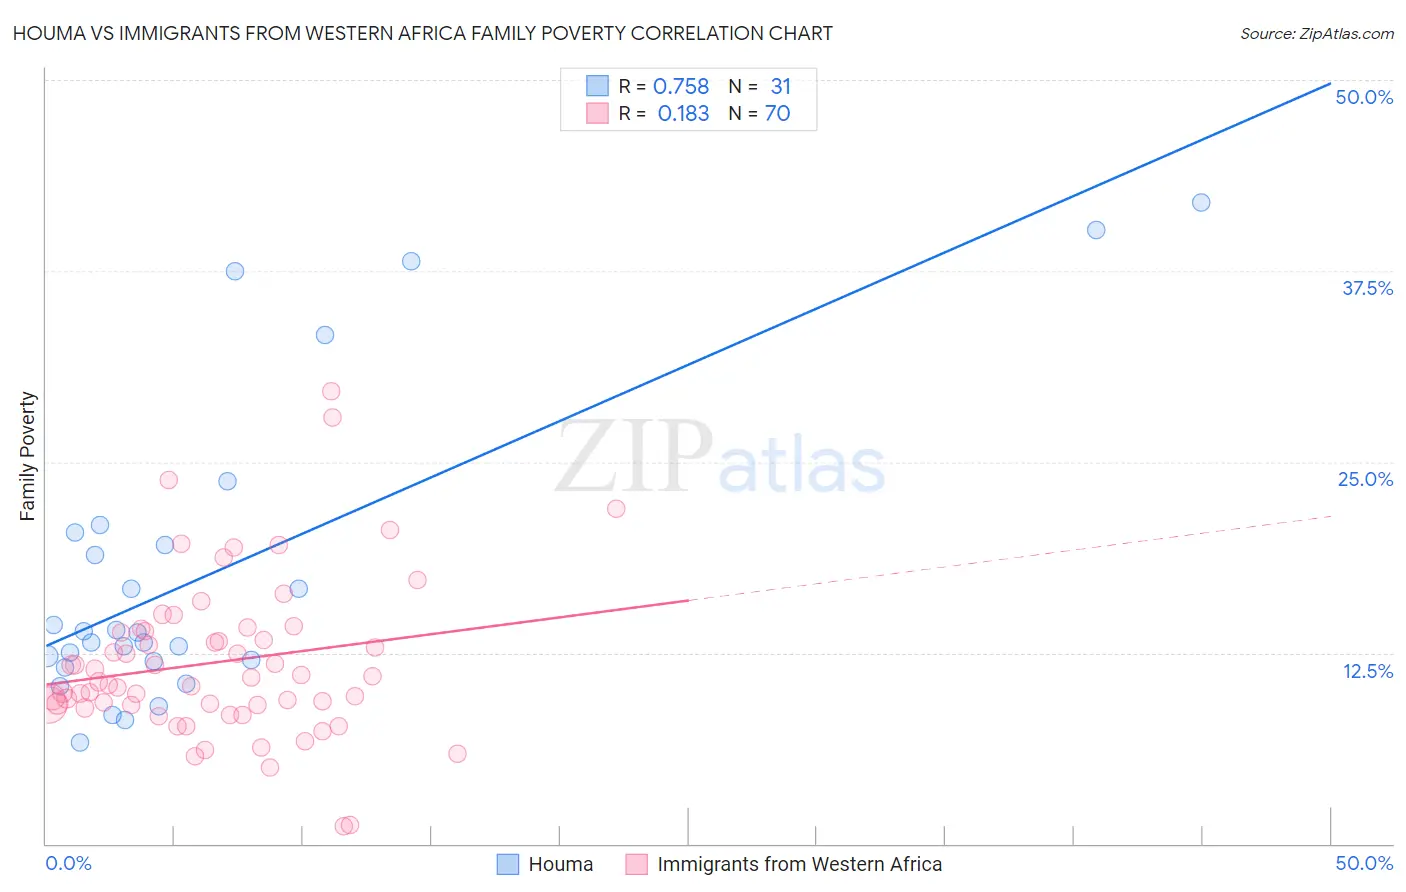 Houma vs Immigrants from Western Africa Family Poverty